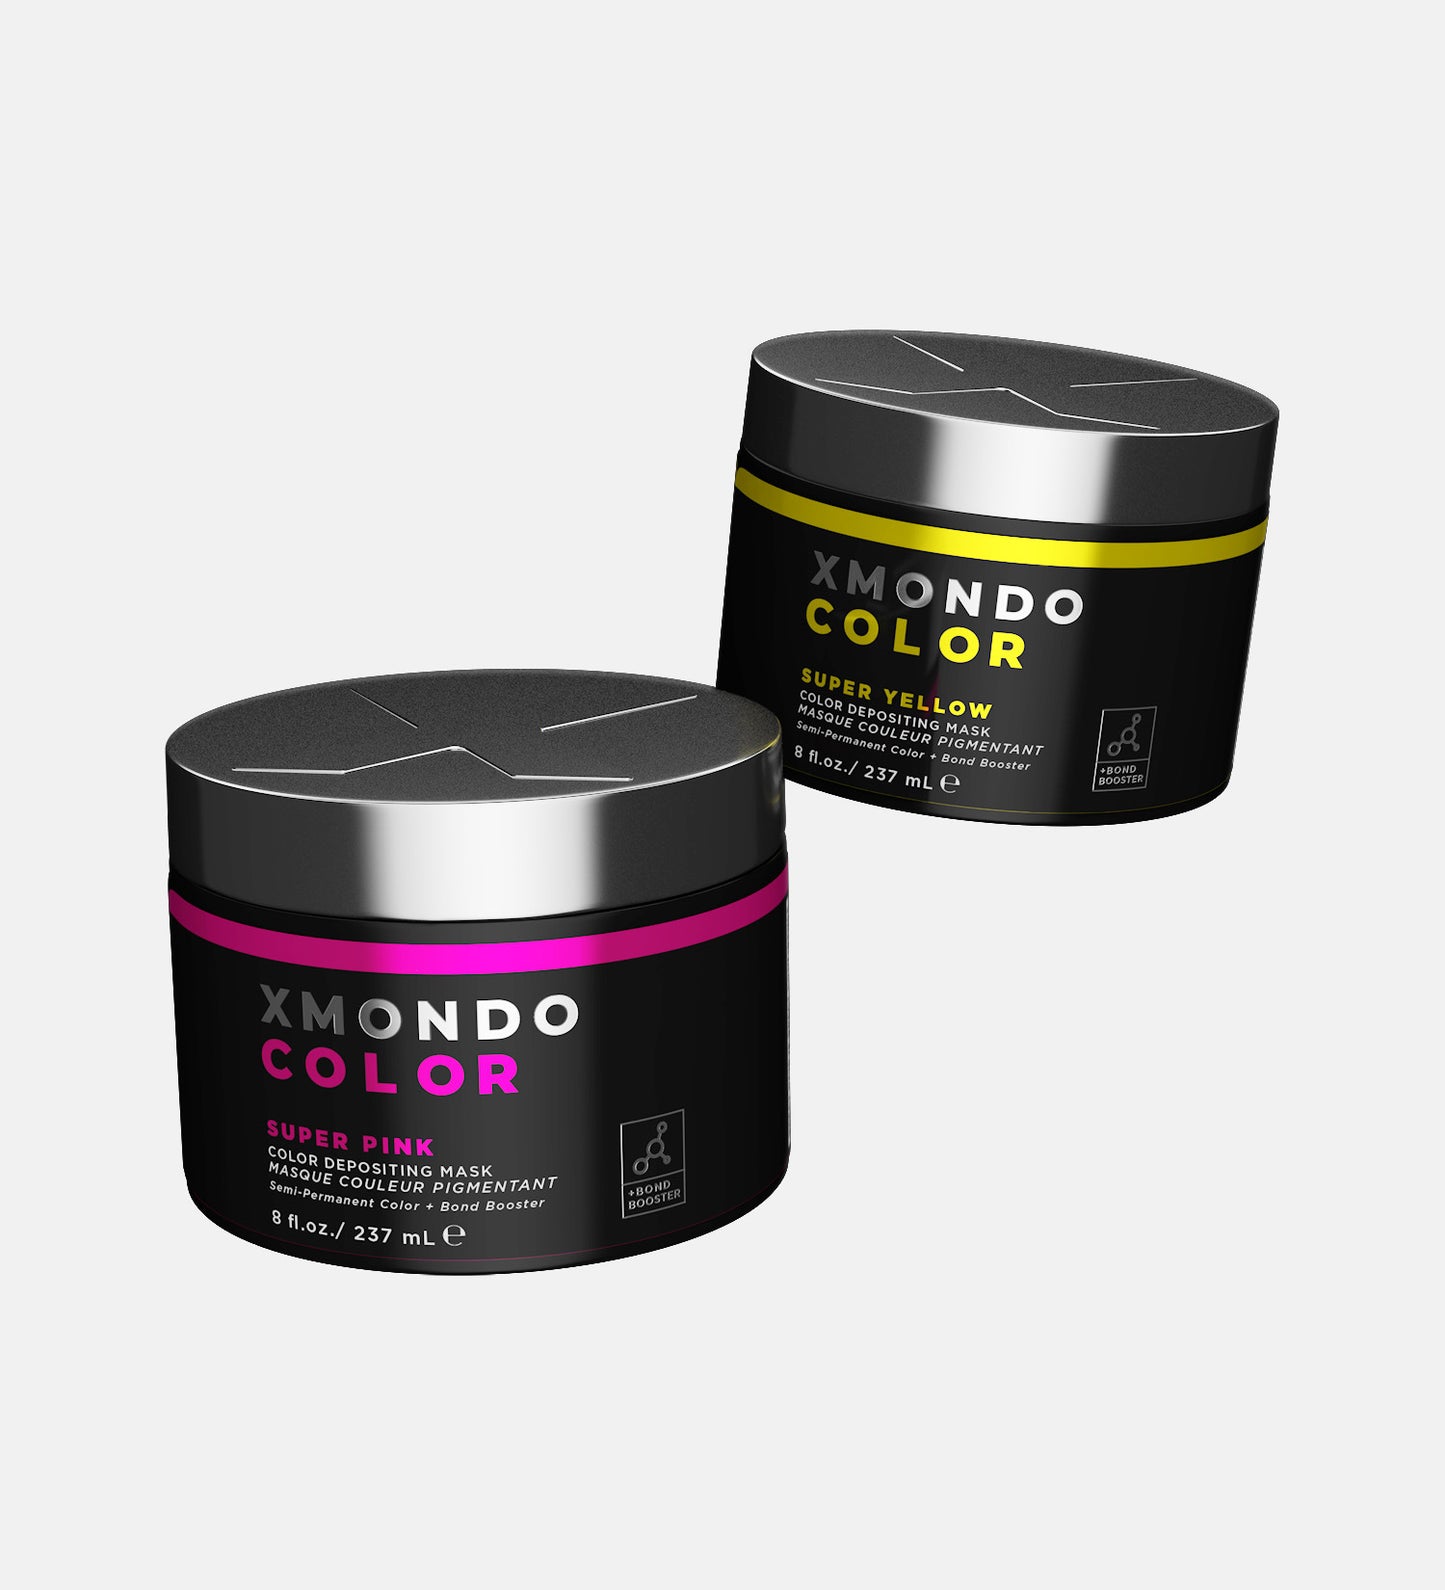 Product shot of Super Pink and Super Yellow hair healing color on white background